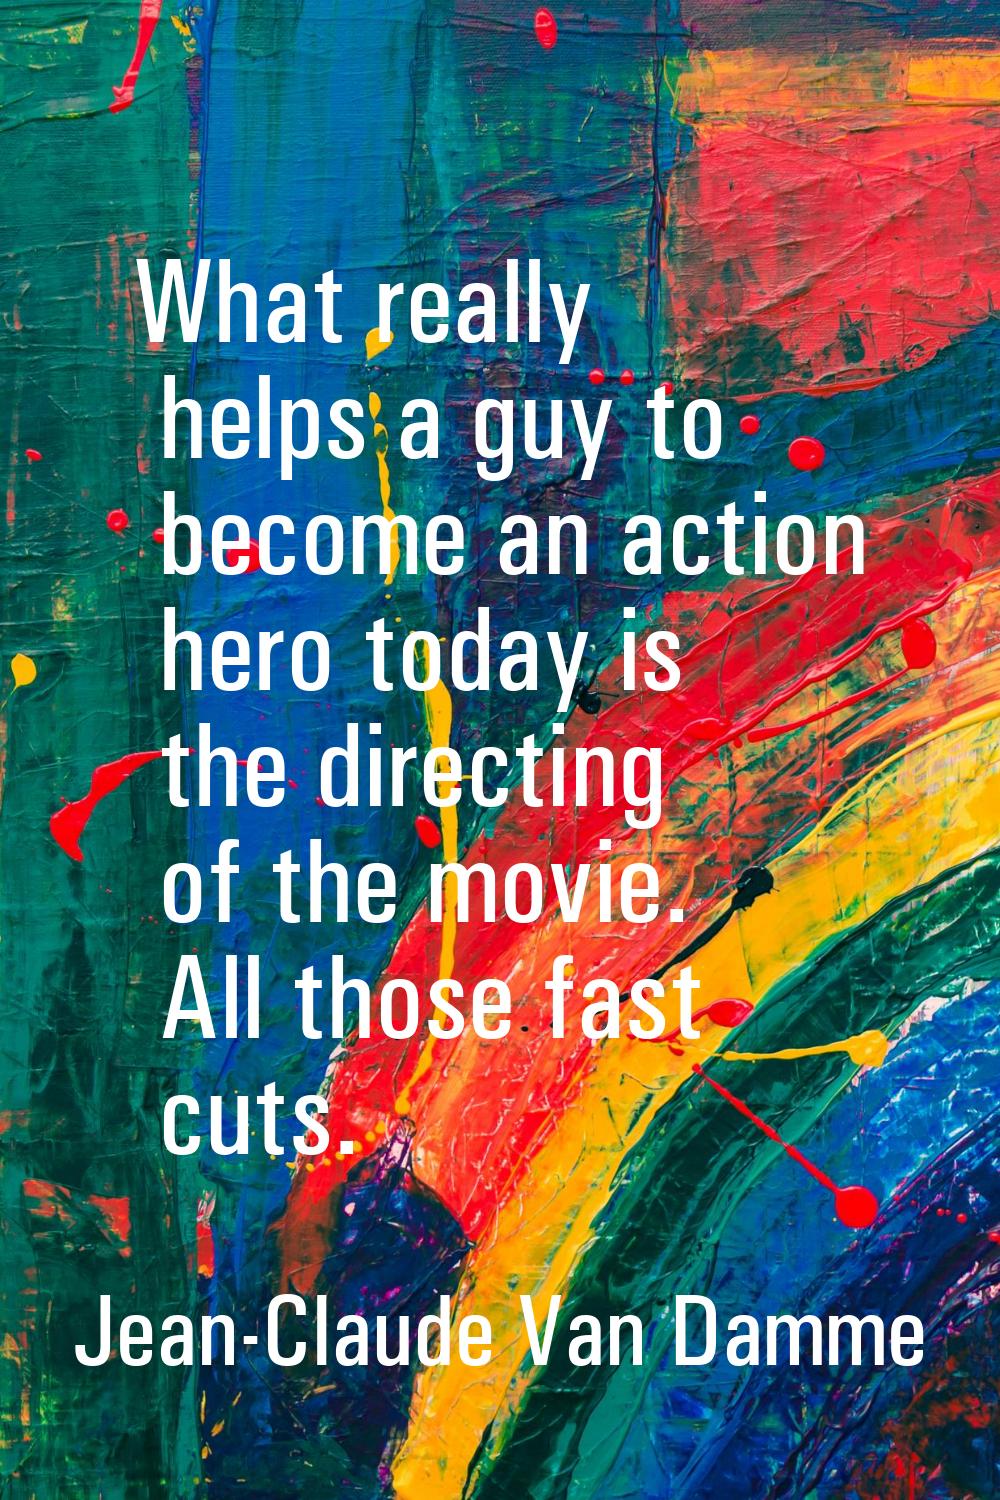 What really helps a guy to become an action hero today is the directing of the movie. All those fas